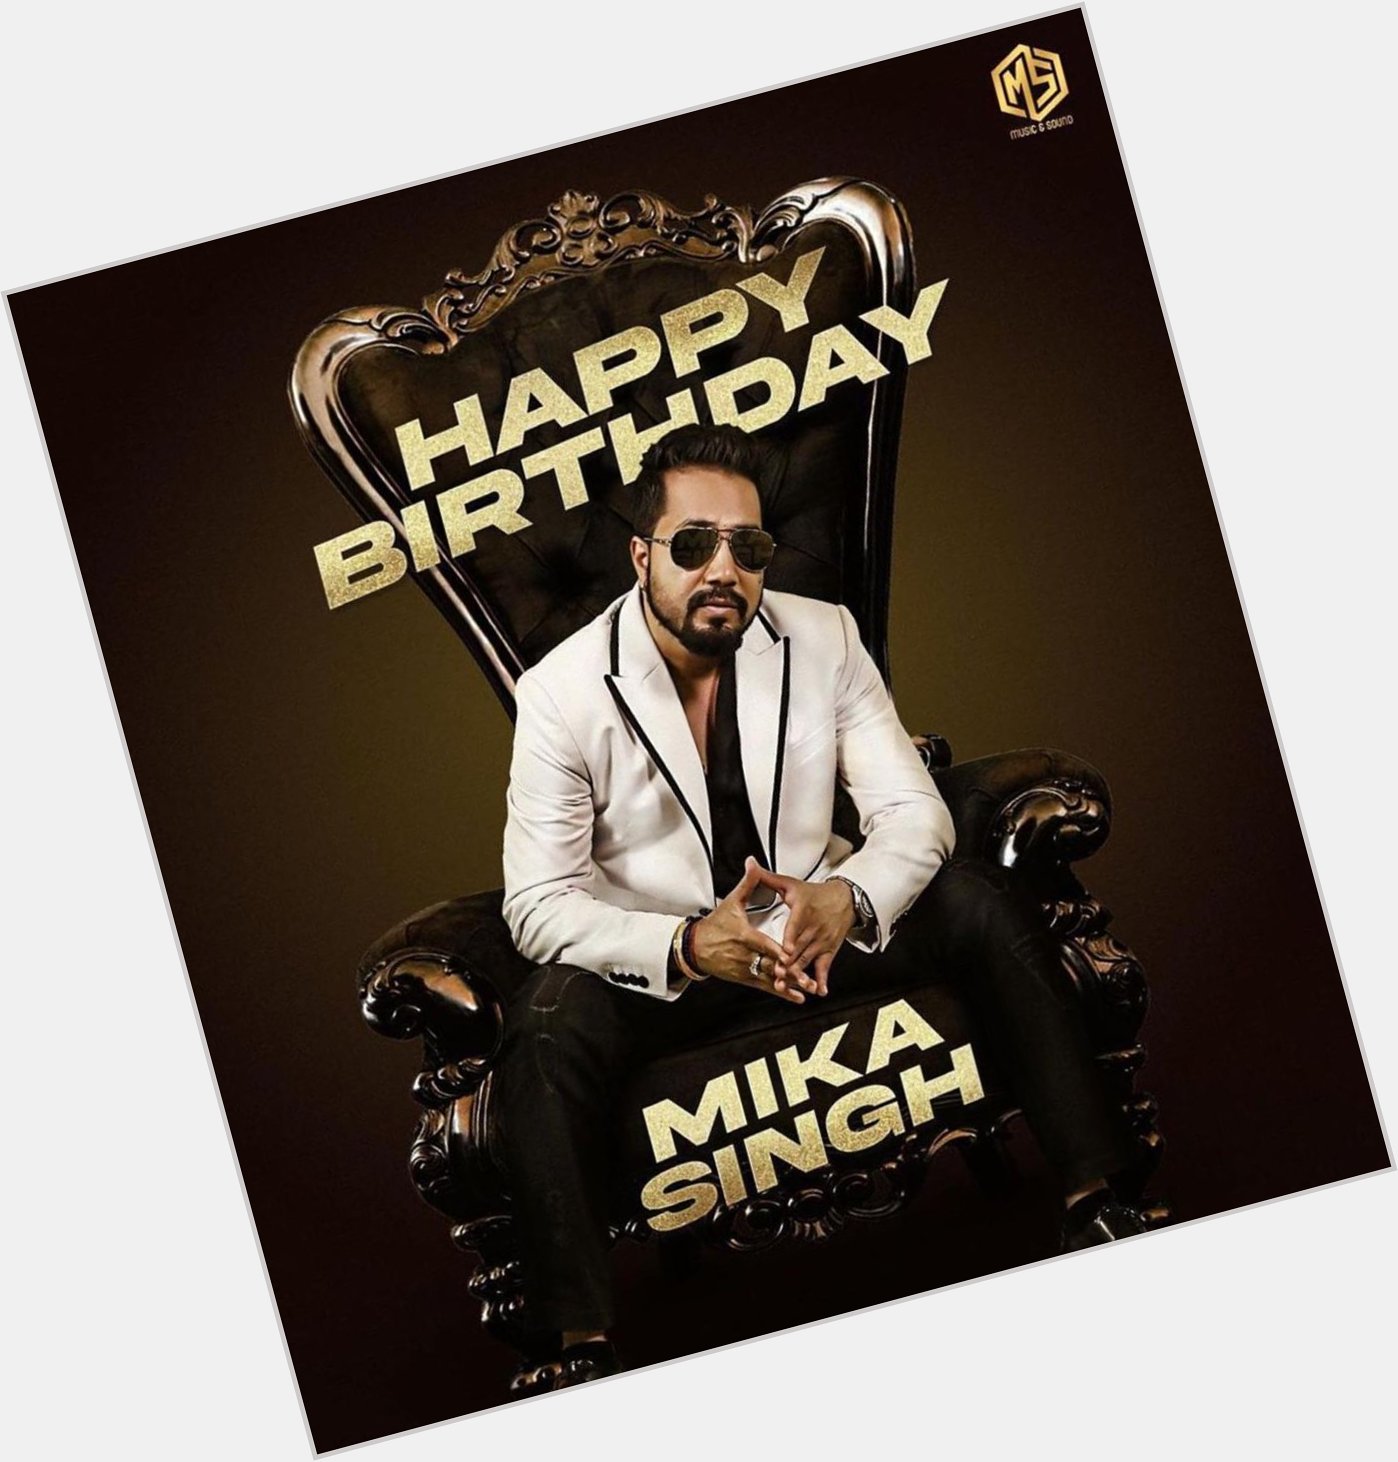 Body knows about it 
He is another here like Sonu soon 
He fed 51000 plus meals 
Happy Birthday Mika Singh 